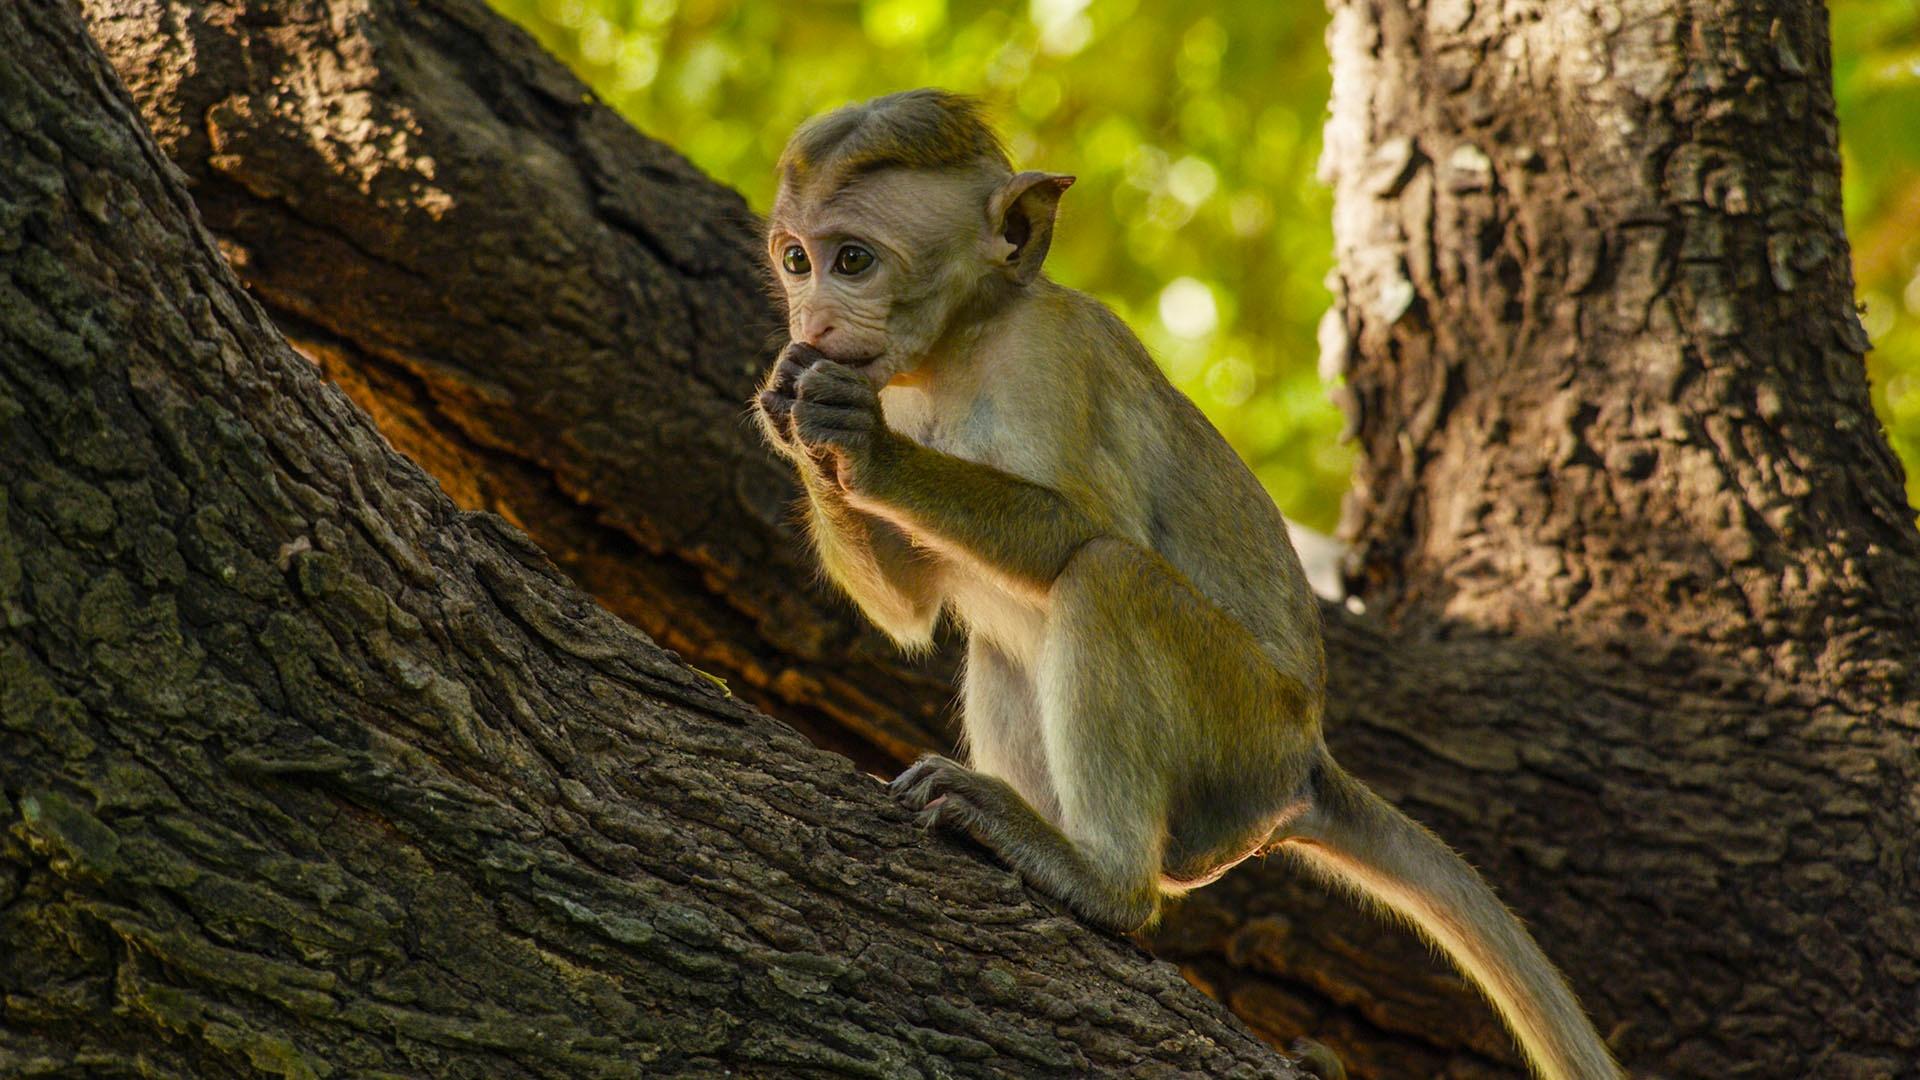 Image of toque macaque, Jazir, eating